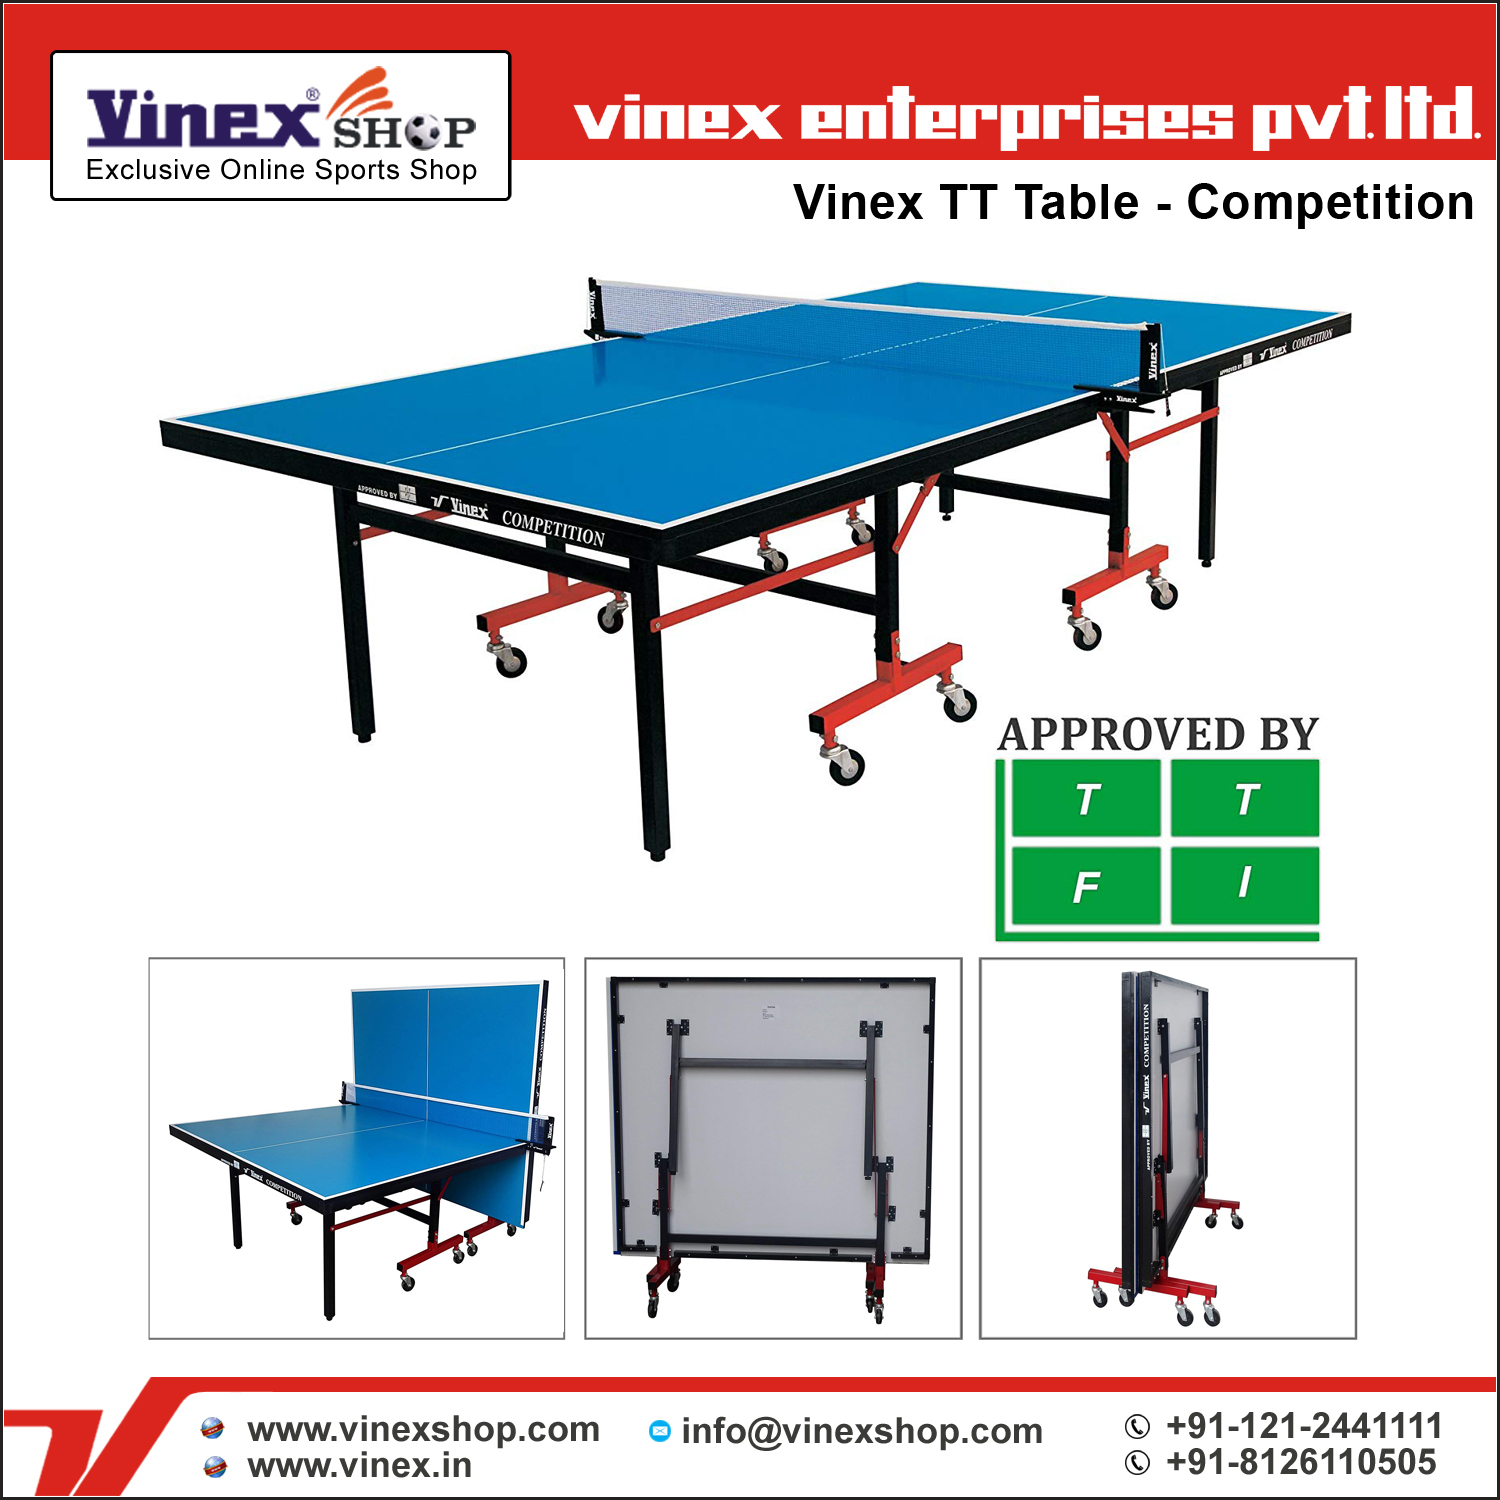 Vinex Sports and Fitness Equipment Sporting Goods and Fitness Equipment and Accessories Manufacturers and Suppliers